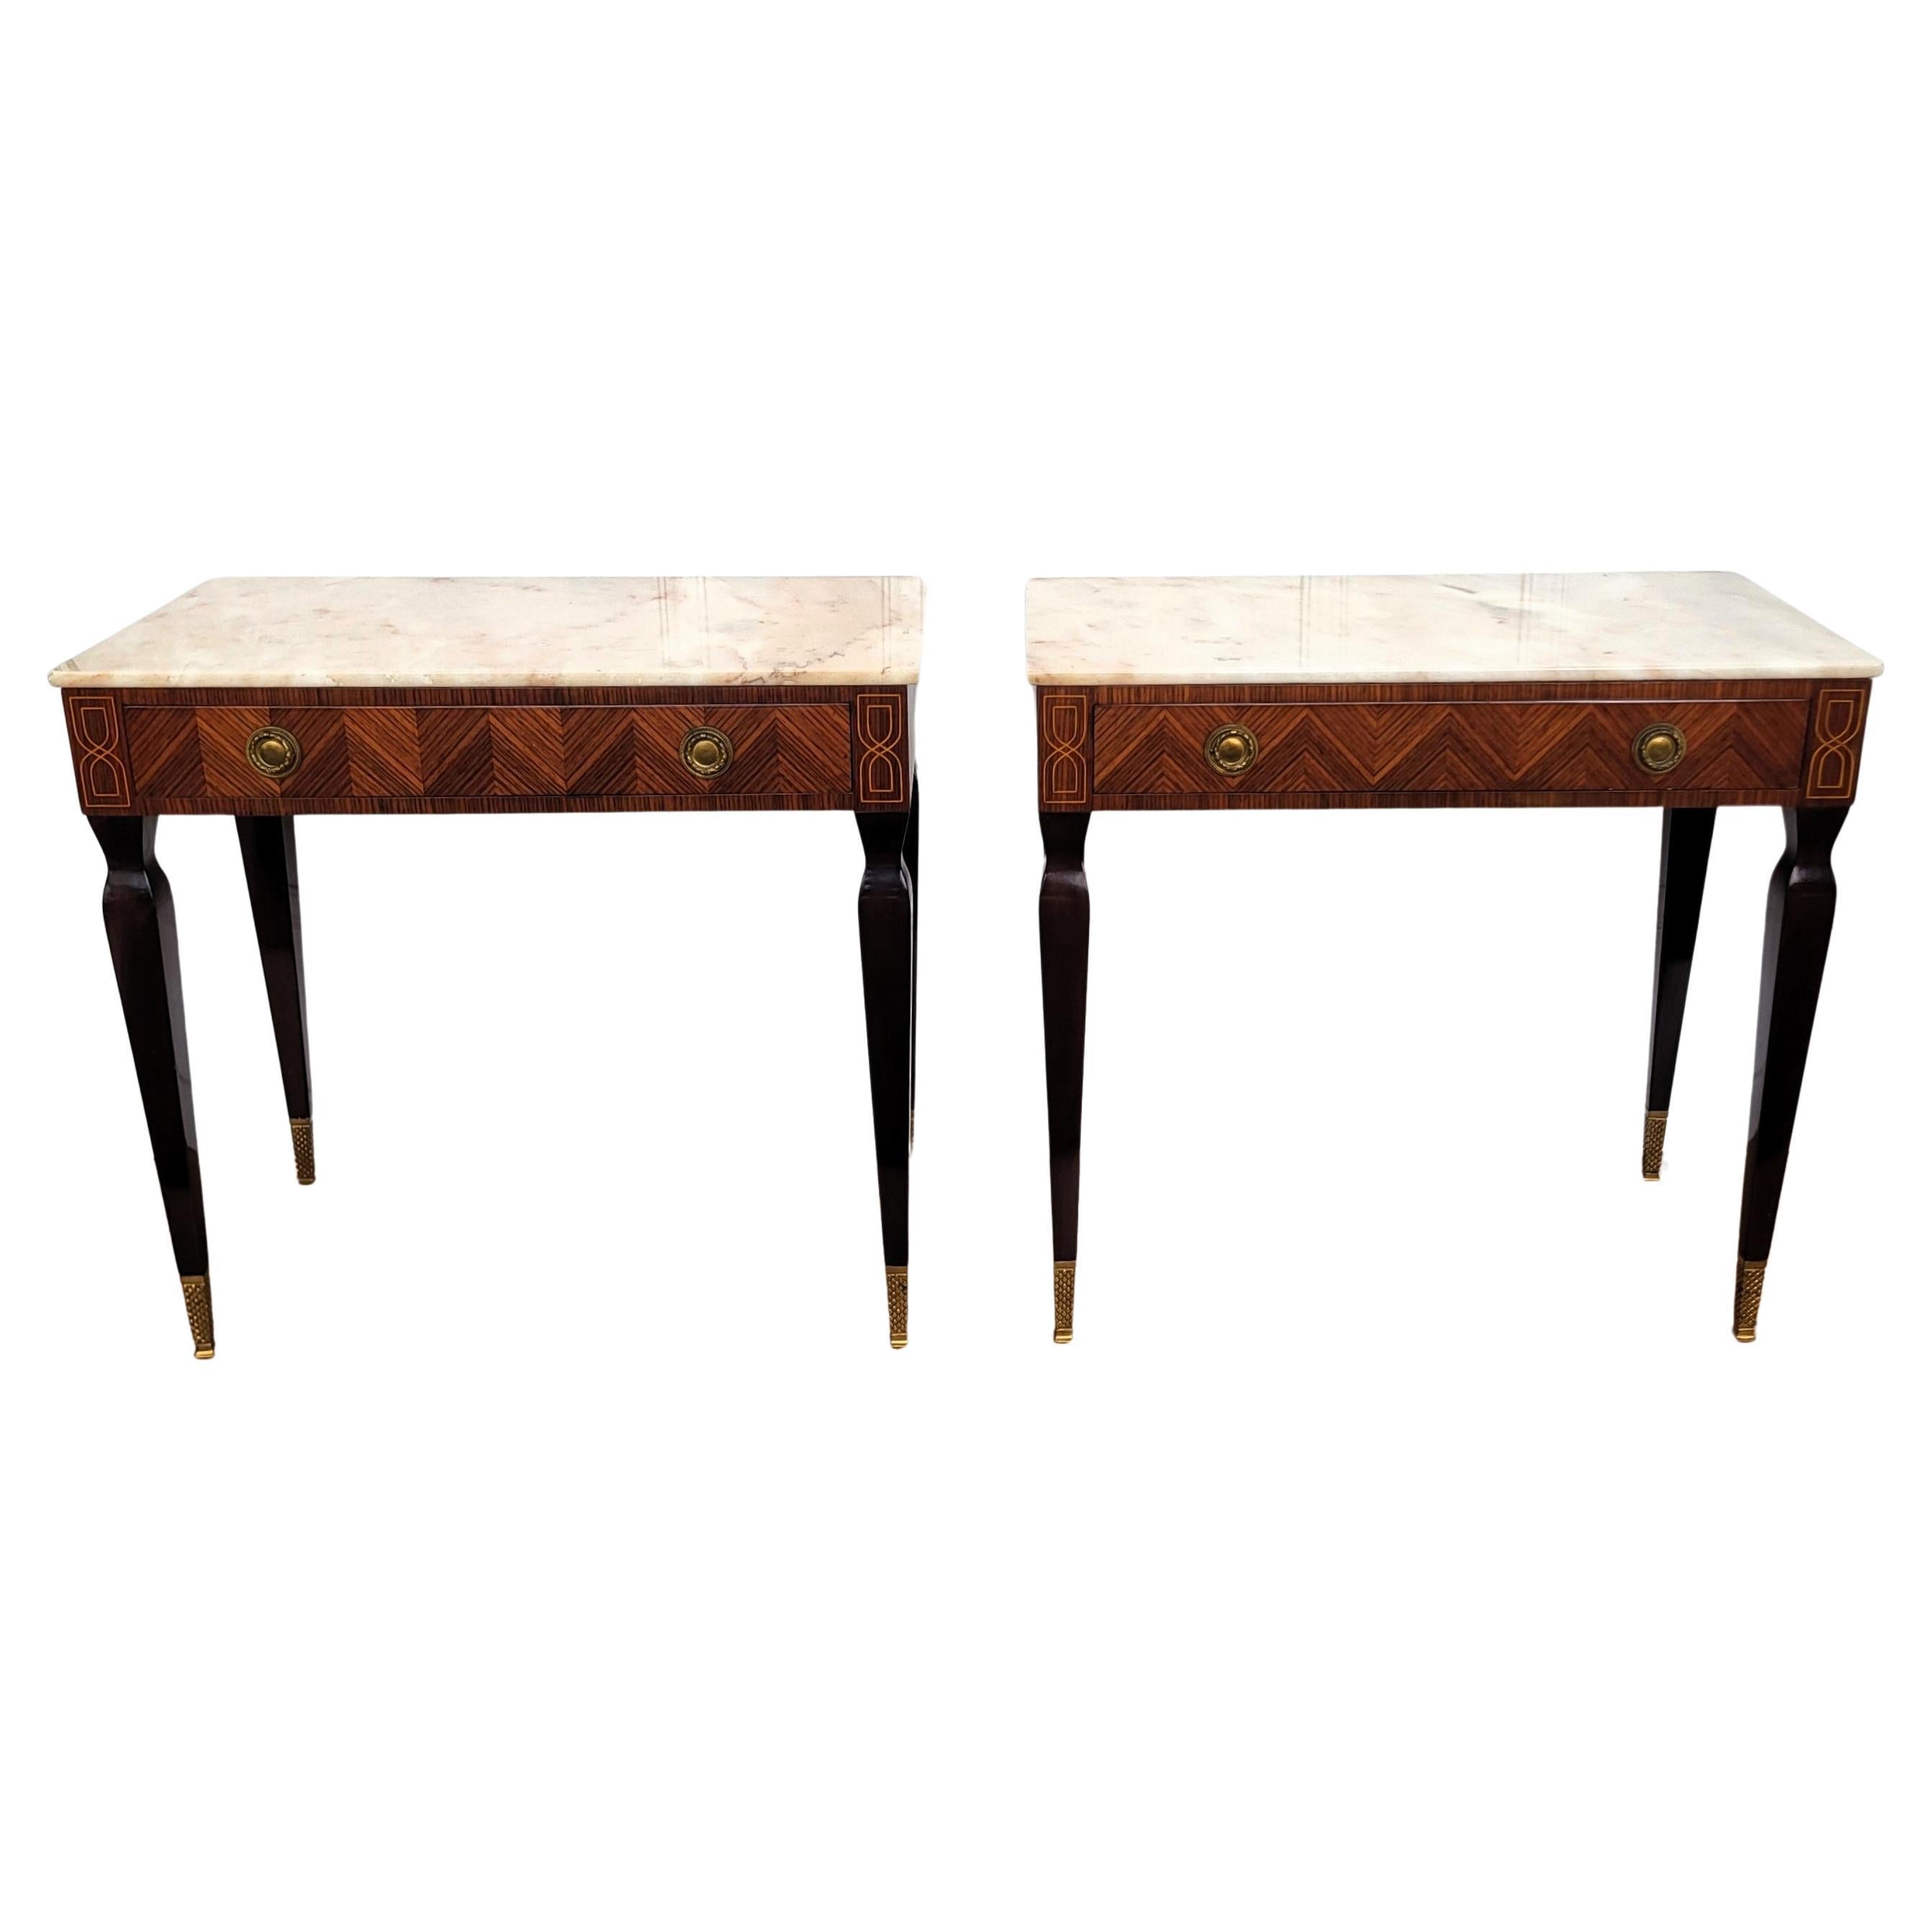 Pair of Italian Art Deco Marquetry Wood Marble Top Night Stands Bedside Tables